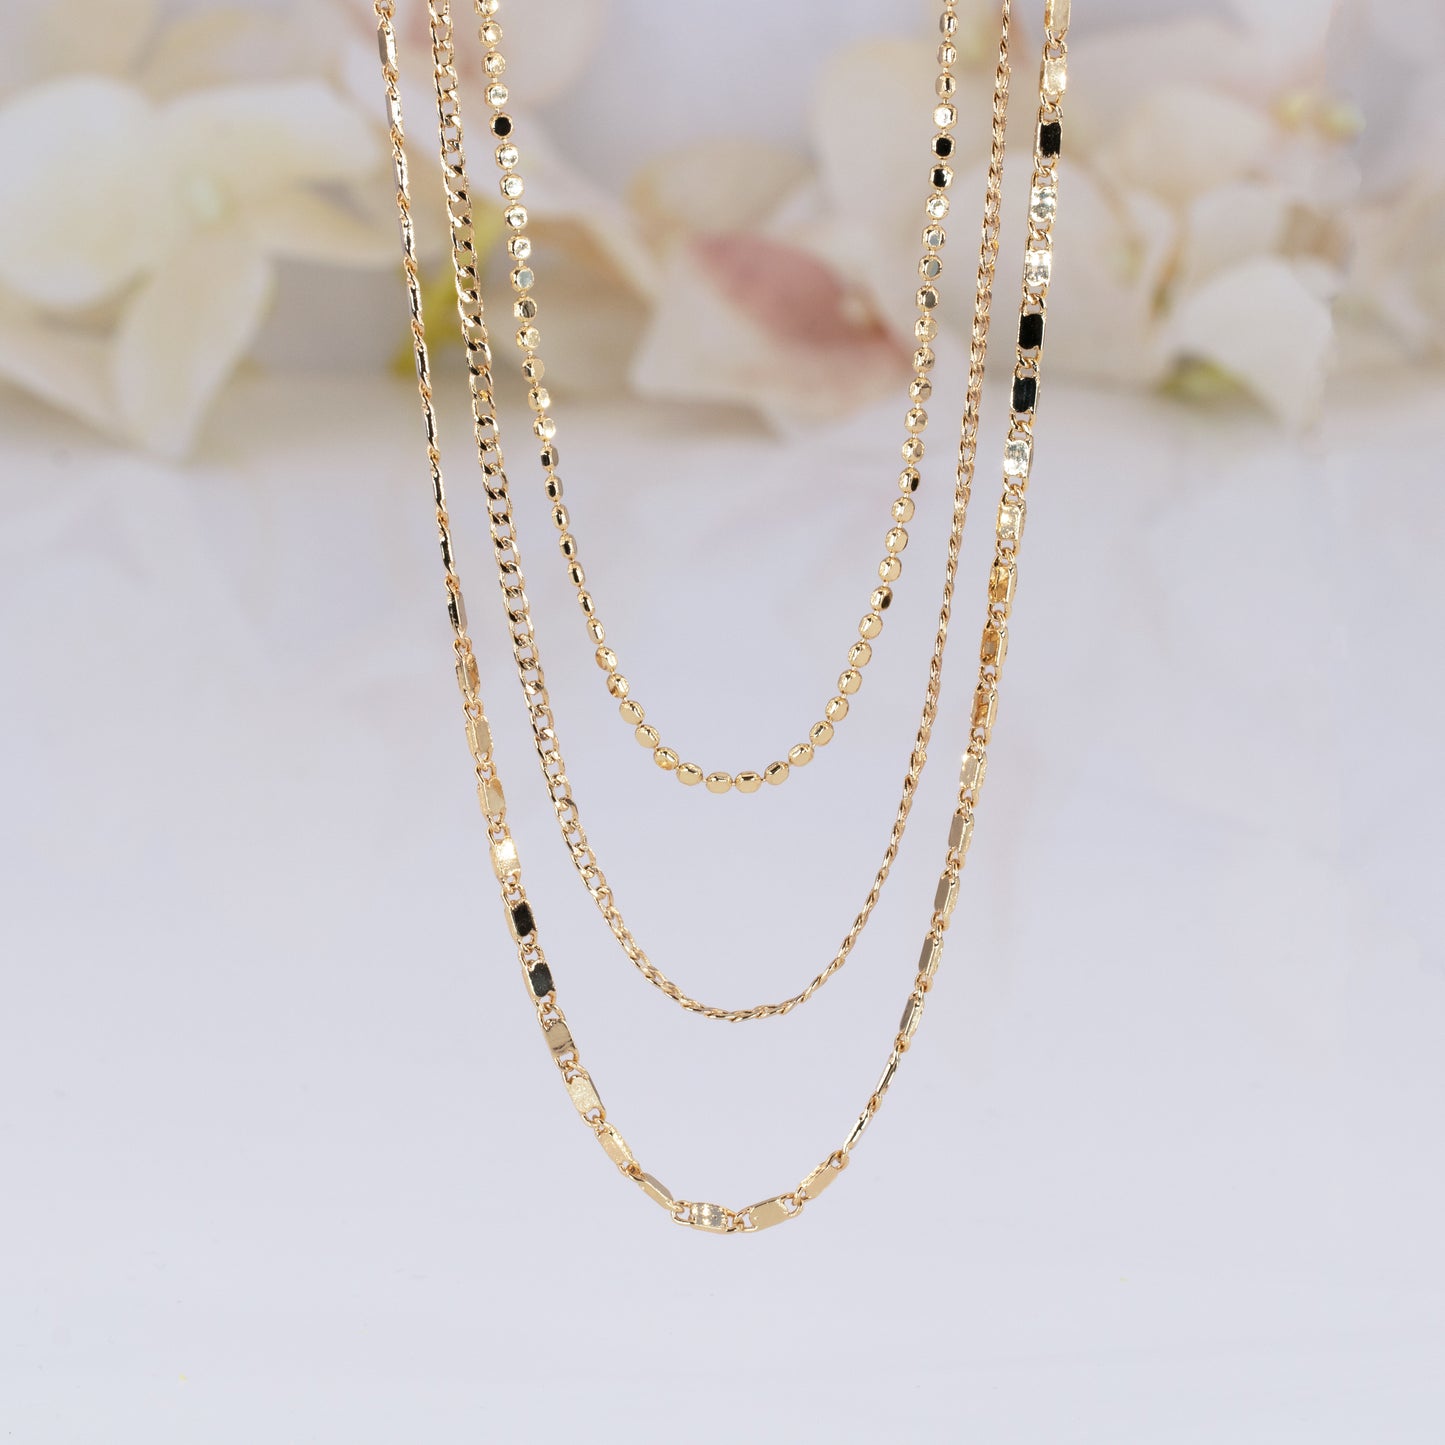 Ball Chain Layered Necklaces Set